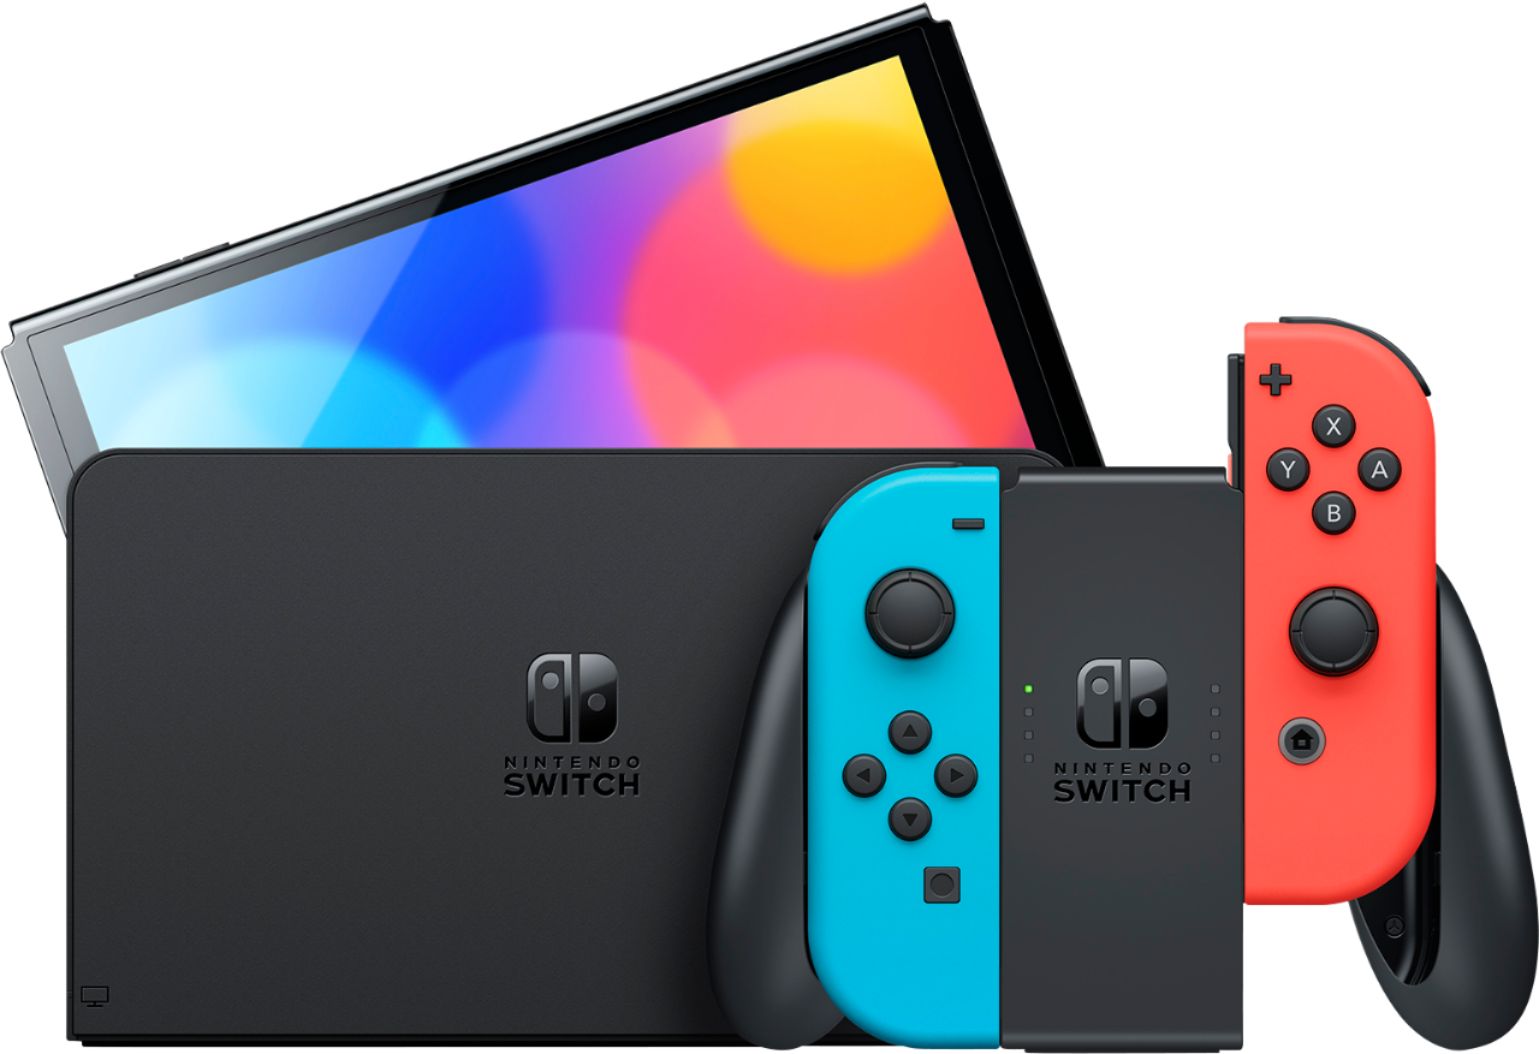 2021 New Nintendo Switch OLED Model Neon Red & Blue Joy Con 64GB Console HD Screen & LAN-Port Dock with 1-2 Switch And Mytrix Joystick Caps & Screen Protector